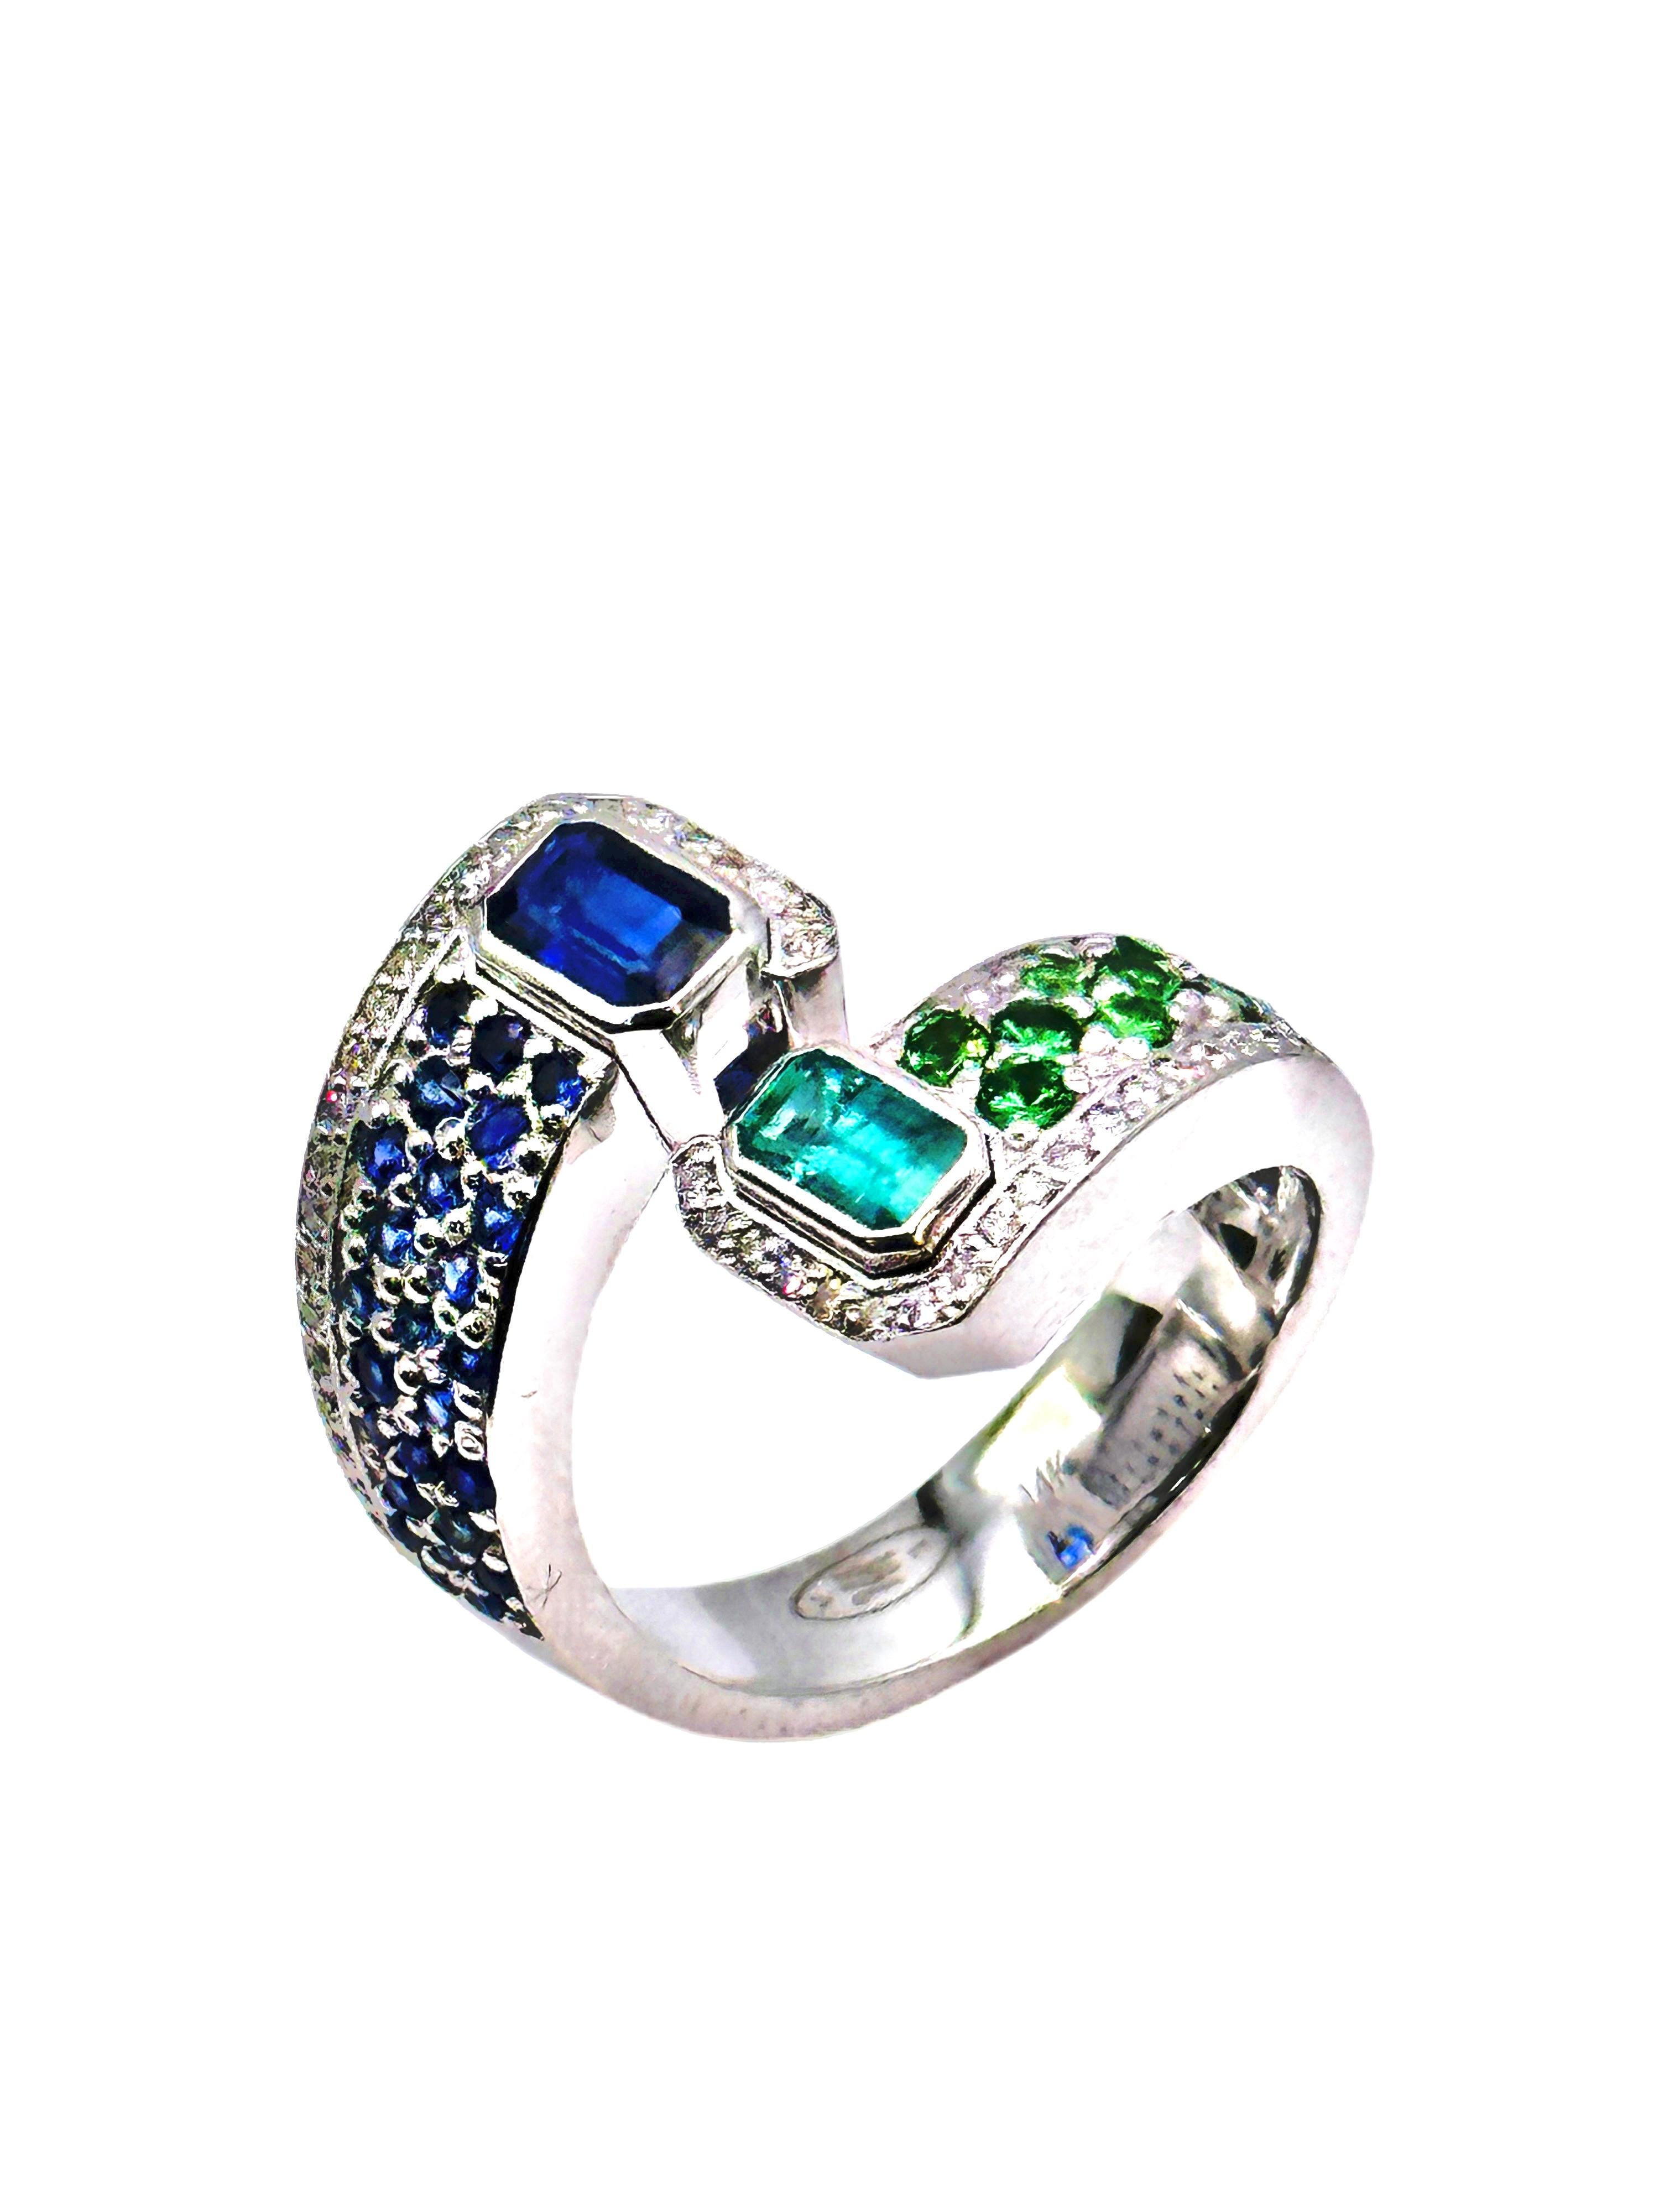 For Sale:  14K White Gold Double Emerald Cut Aquamarine and Blue Sapphire Bypass Ring 2